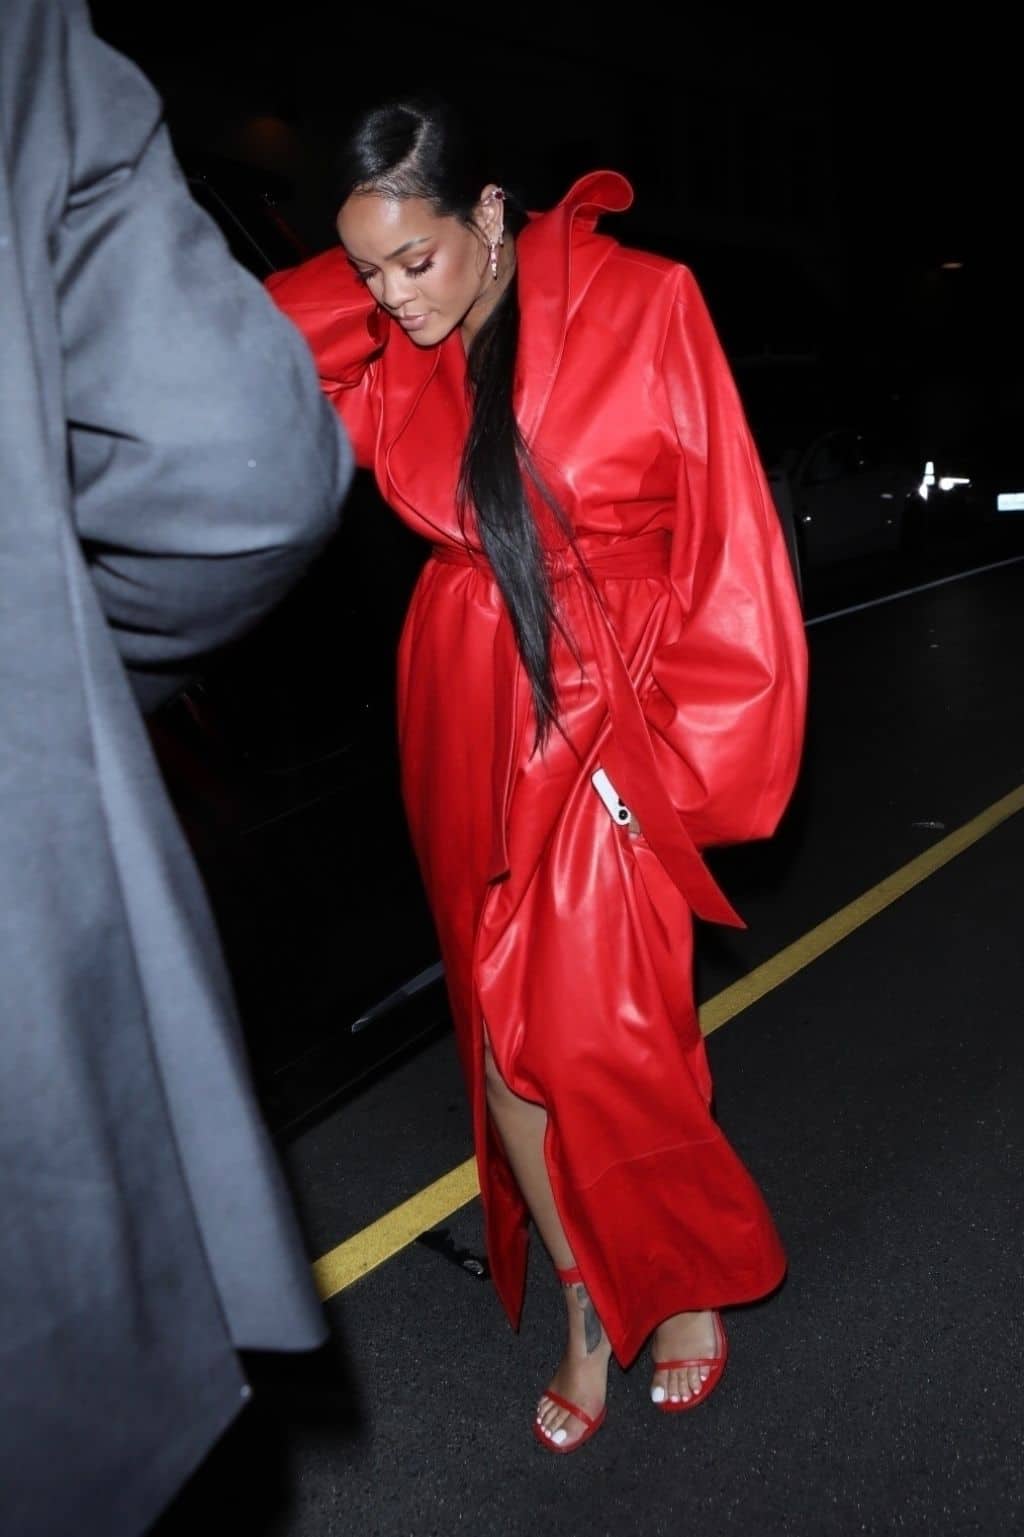 Rihanna Wore an All-red Outfit to Dine with A$AP Rocky at the Giorgio Baldi